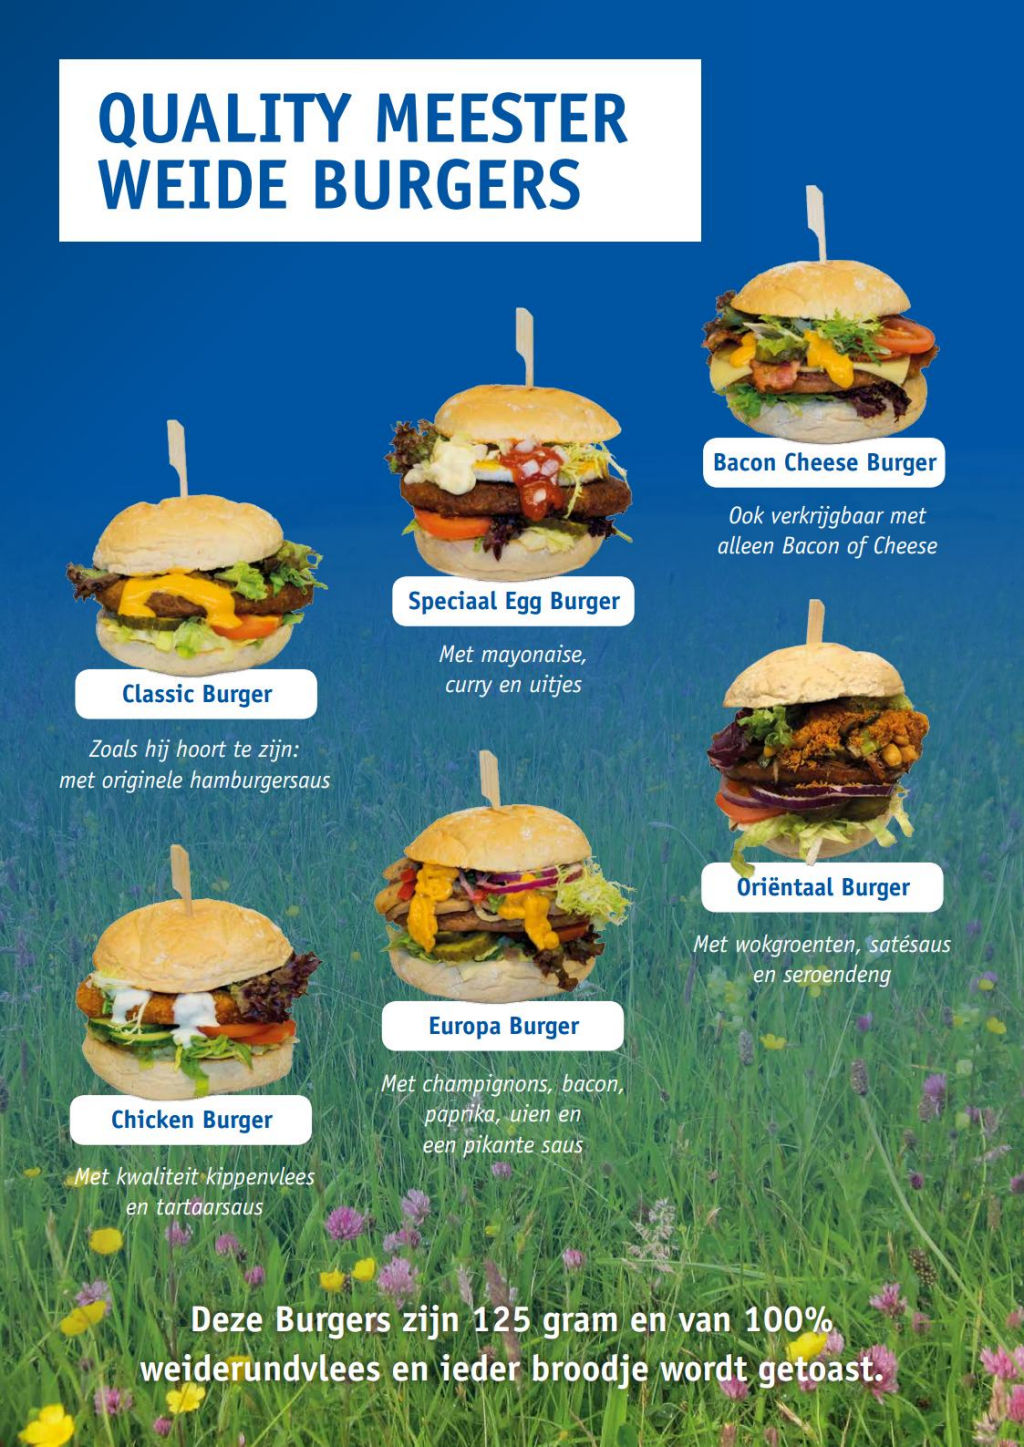 Quality Meester Weide Burgers